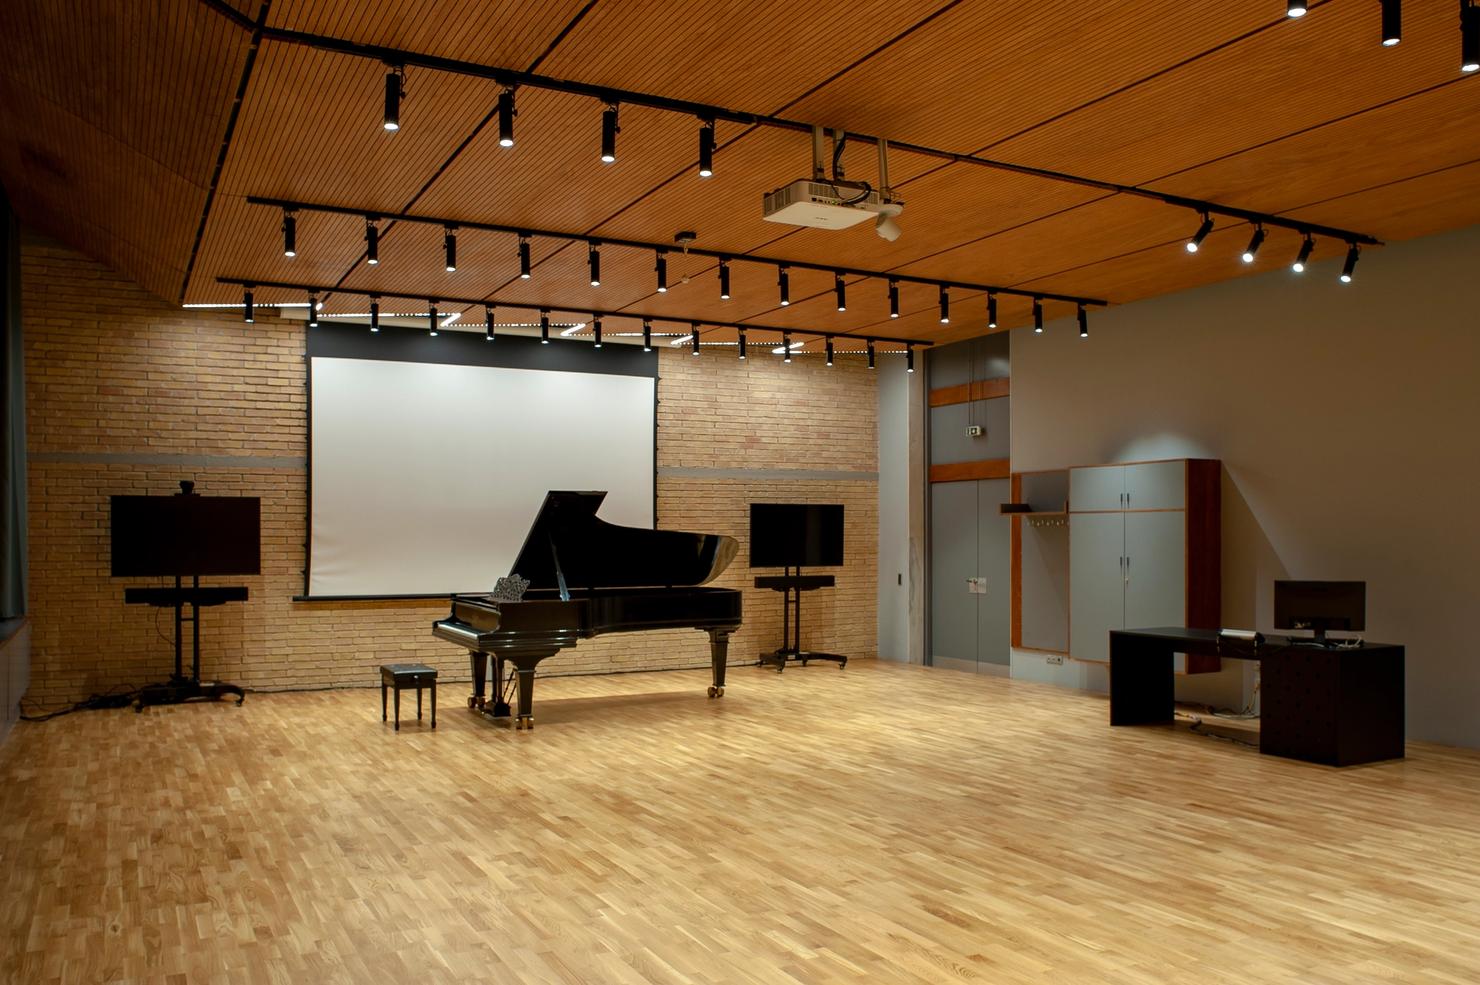 The distance learning studio is a room within the Athens Conservatoire building with wooden flooring and ceiling. On a brick wall there are two monitors between a blank projection screen. A grand piano is in front of the screen. To the left, there is a desk with a computer next to a standing cabinet.